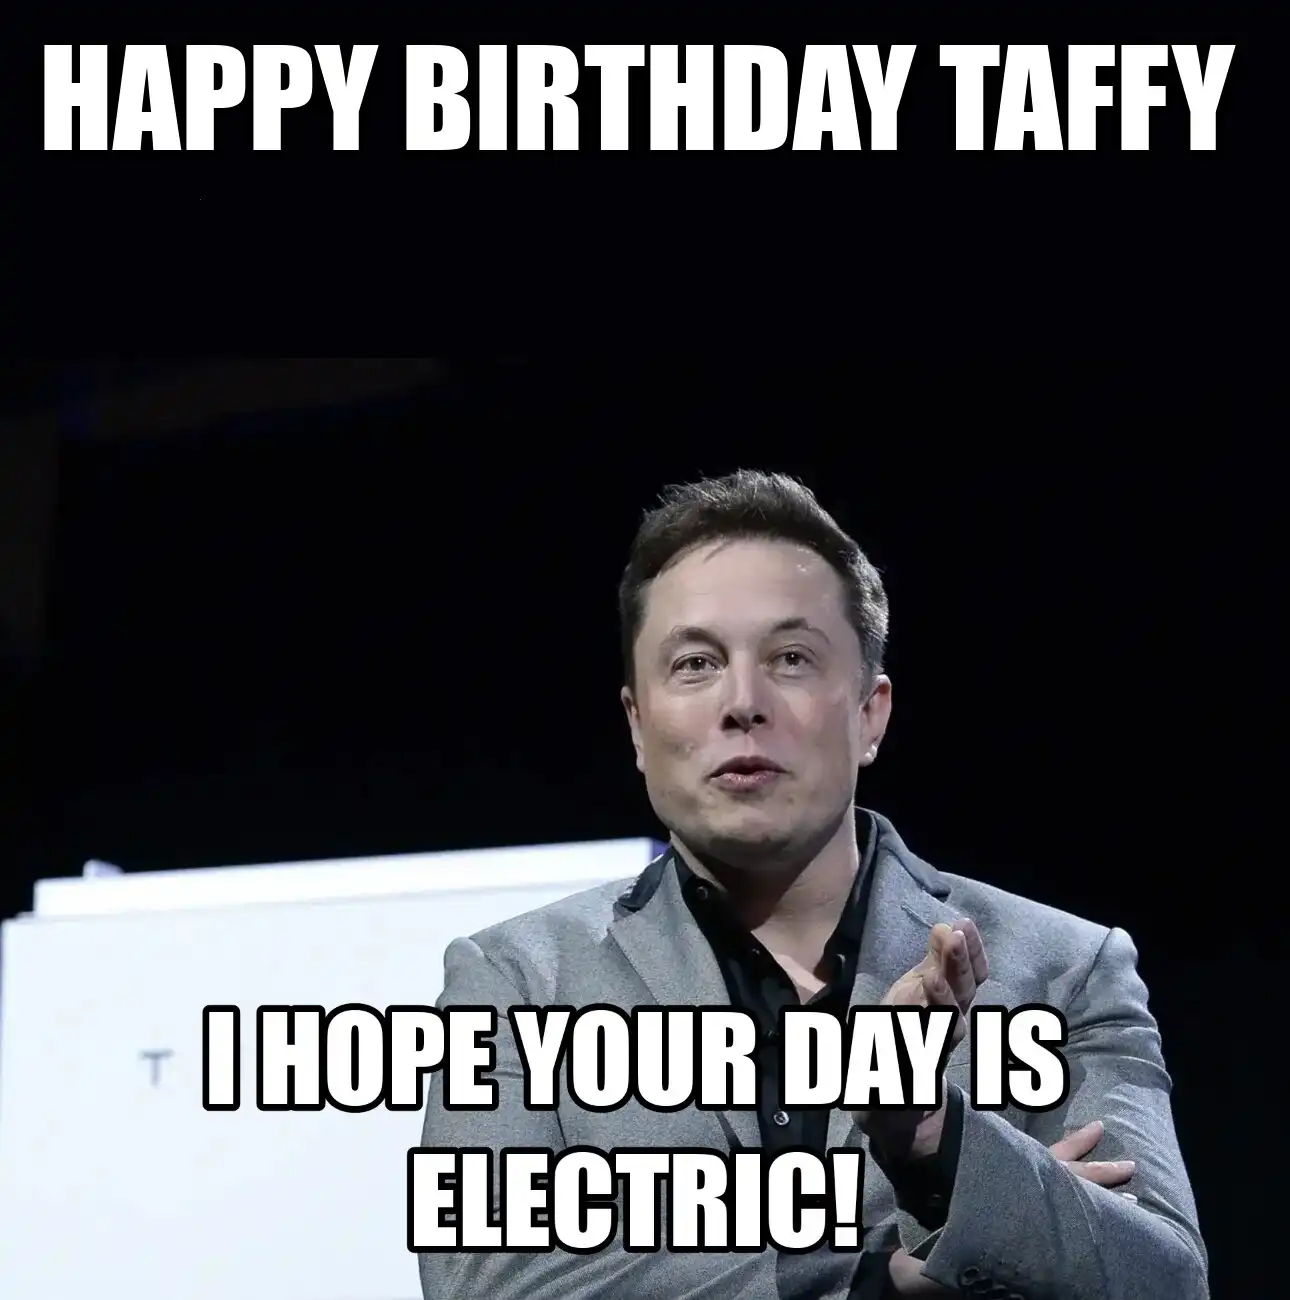 Happy Birthday Taffy I Hope Your Day Is Electric Meme